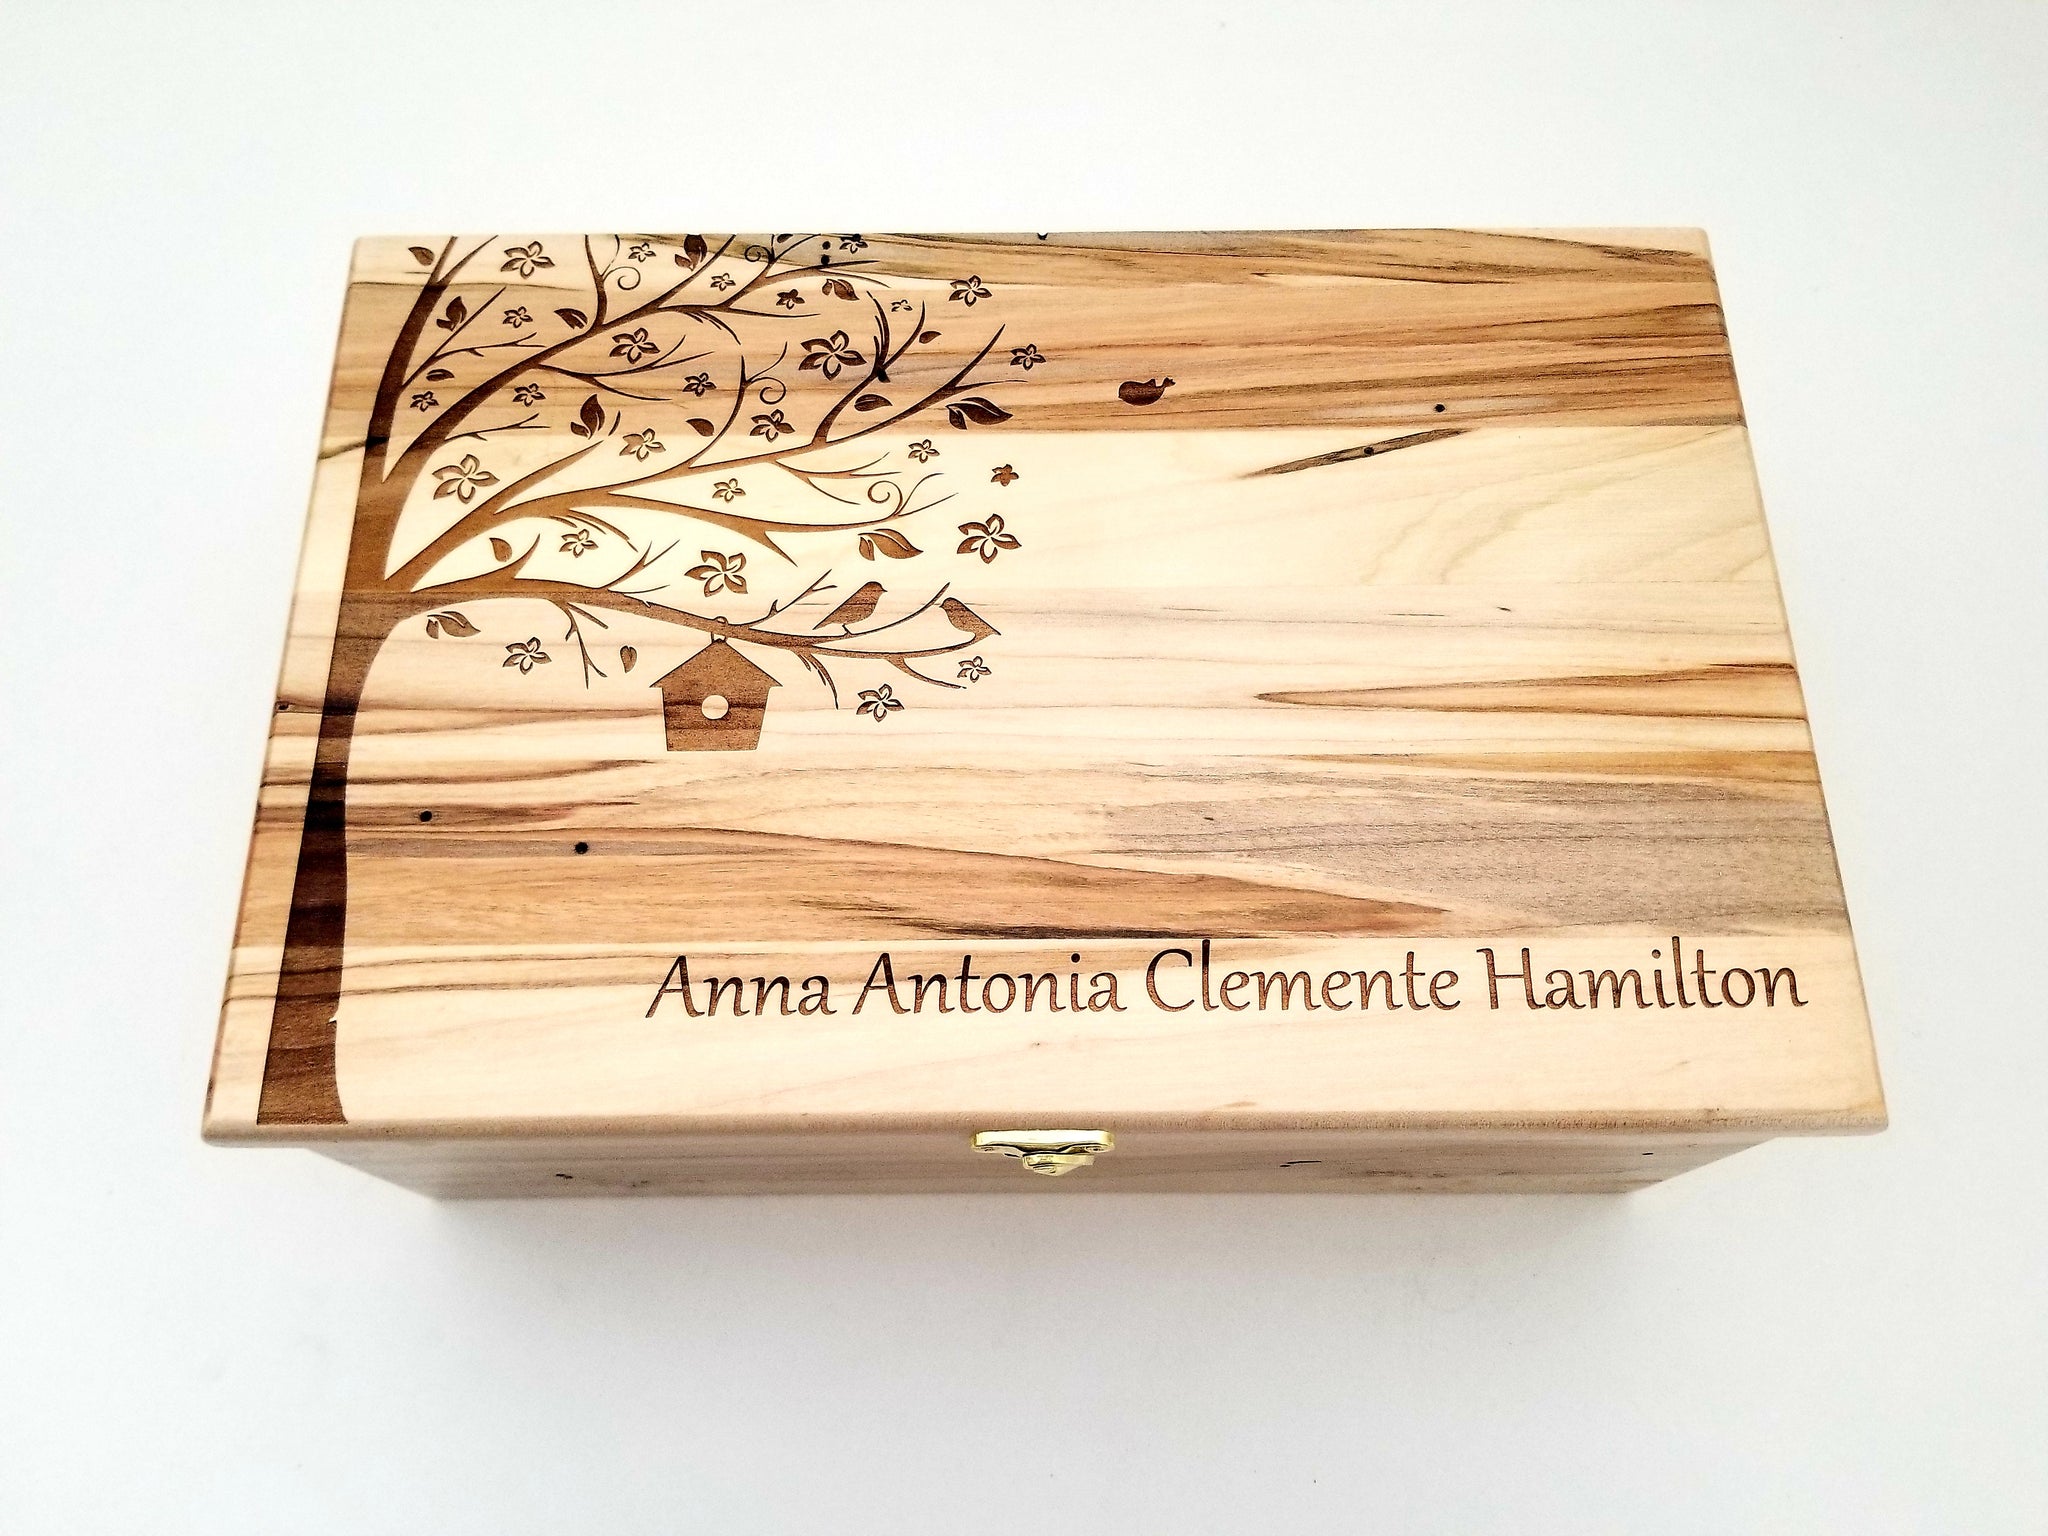 Personalized Tree with Bird House Memory Box